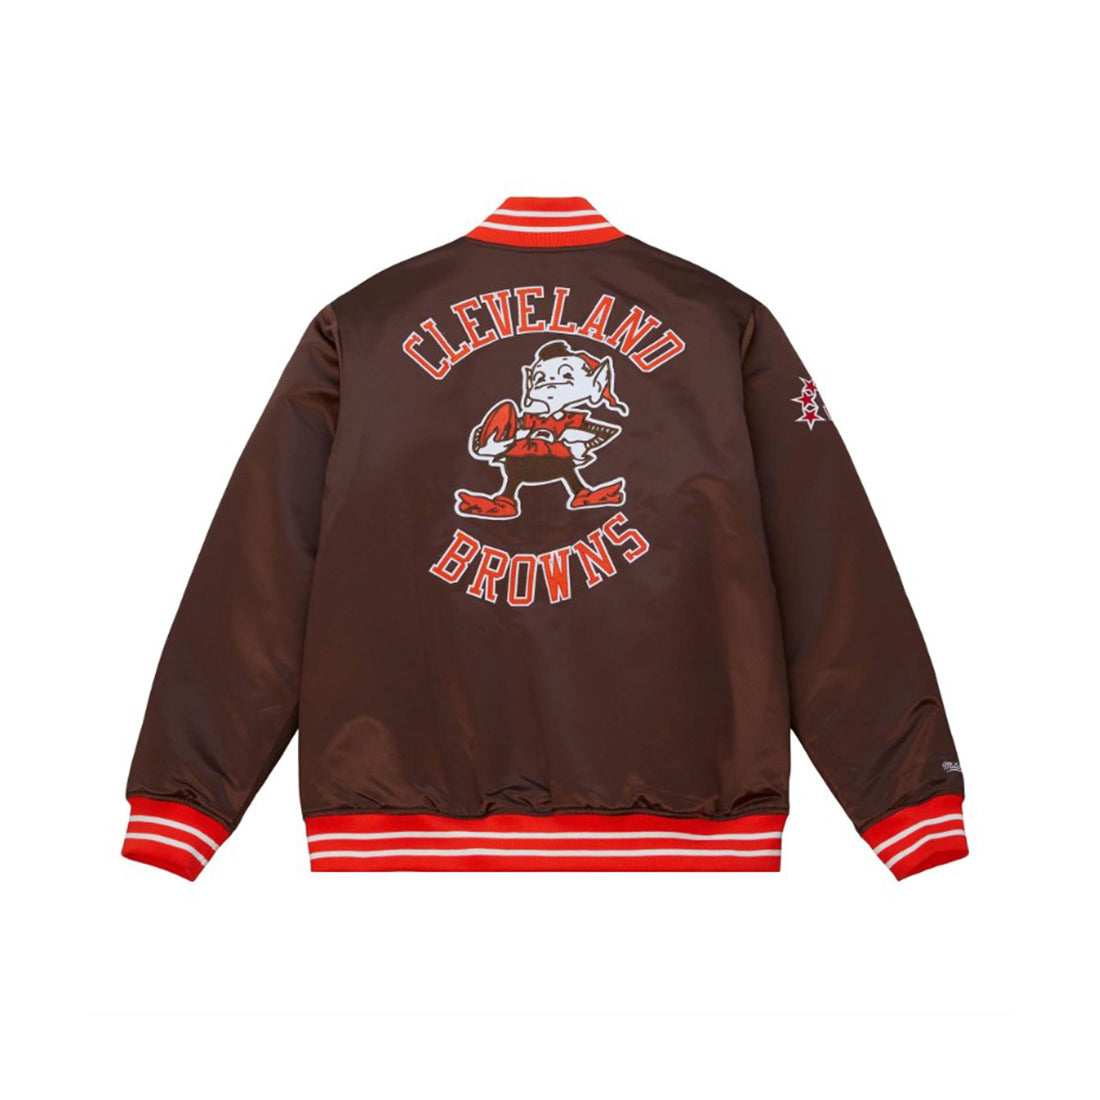 Giacca College Mitchell & Ness - Cleveland Browns Satin Jacket-Marrone